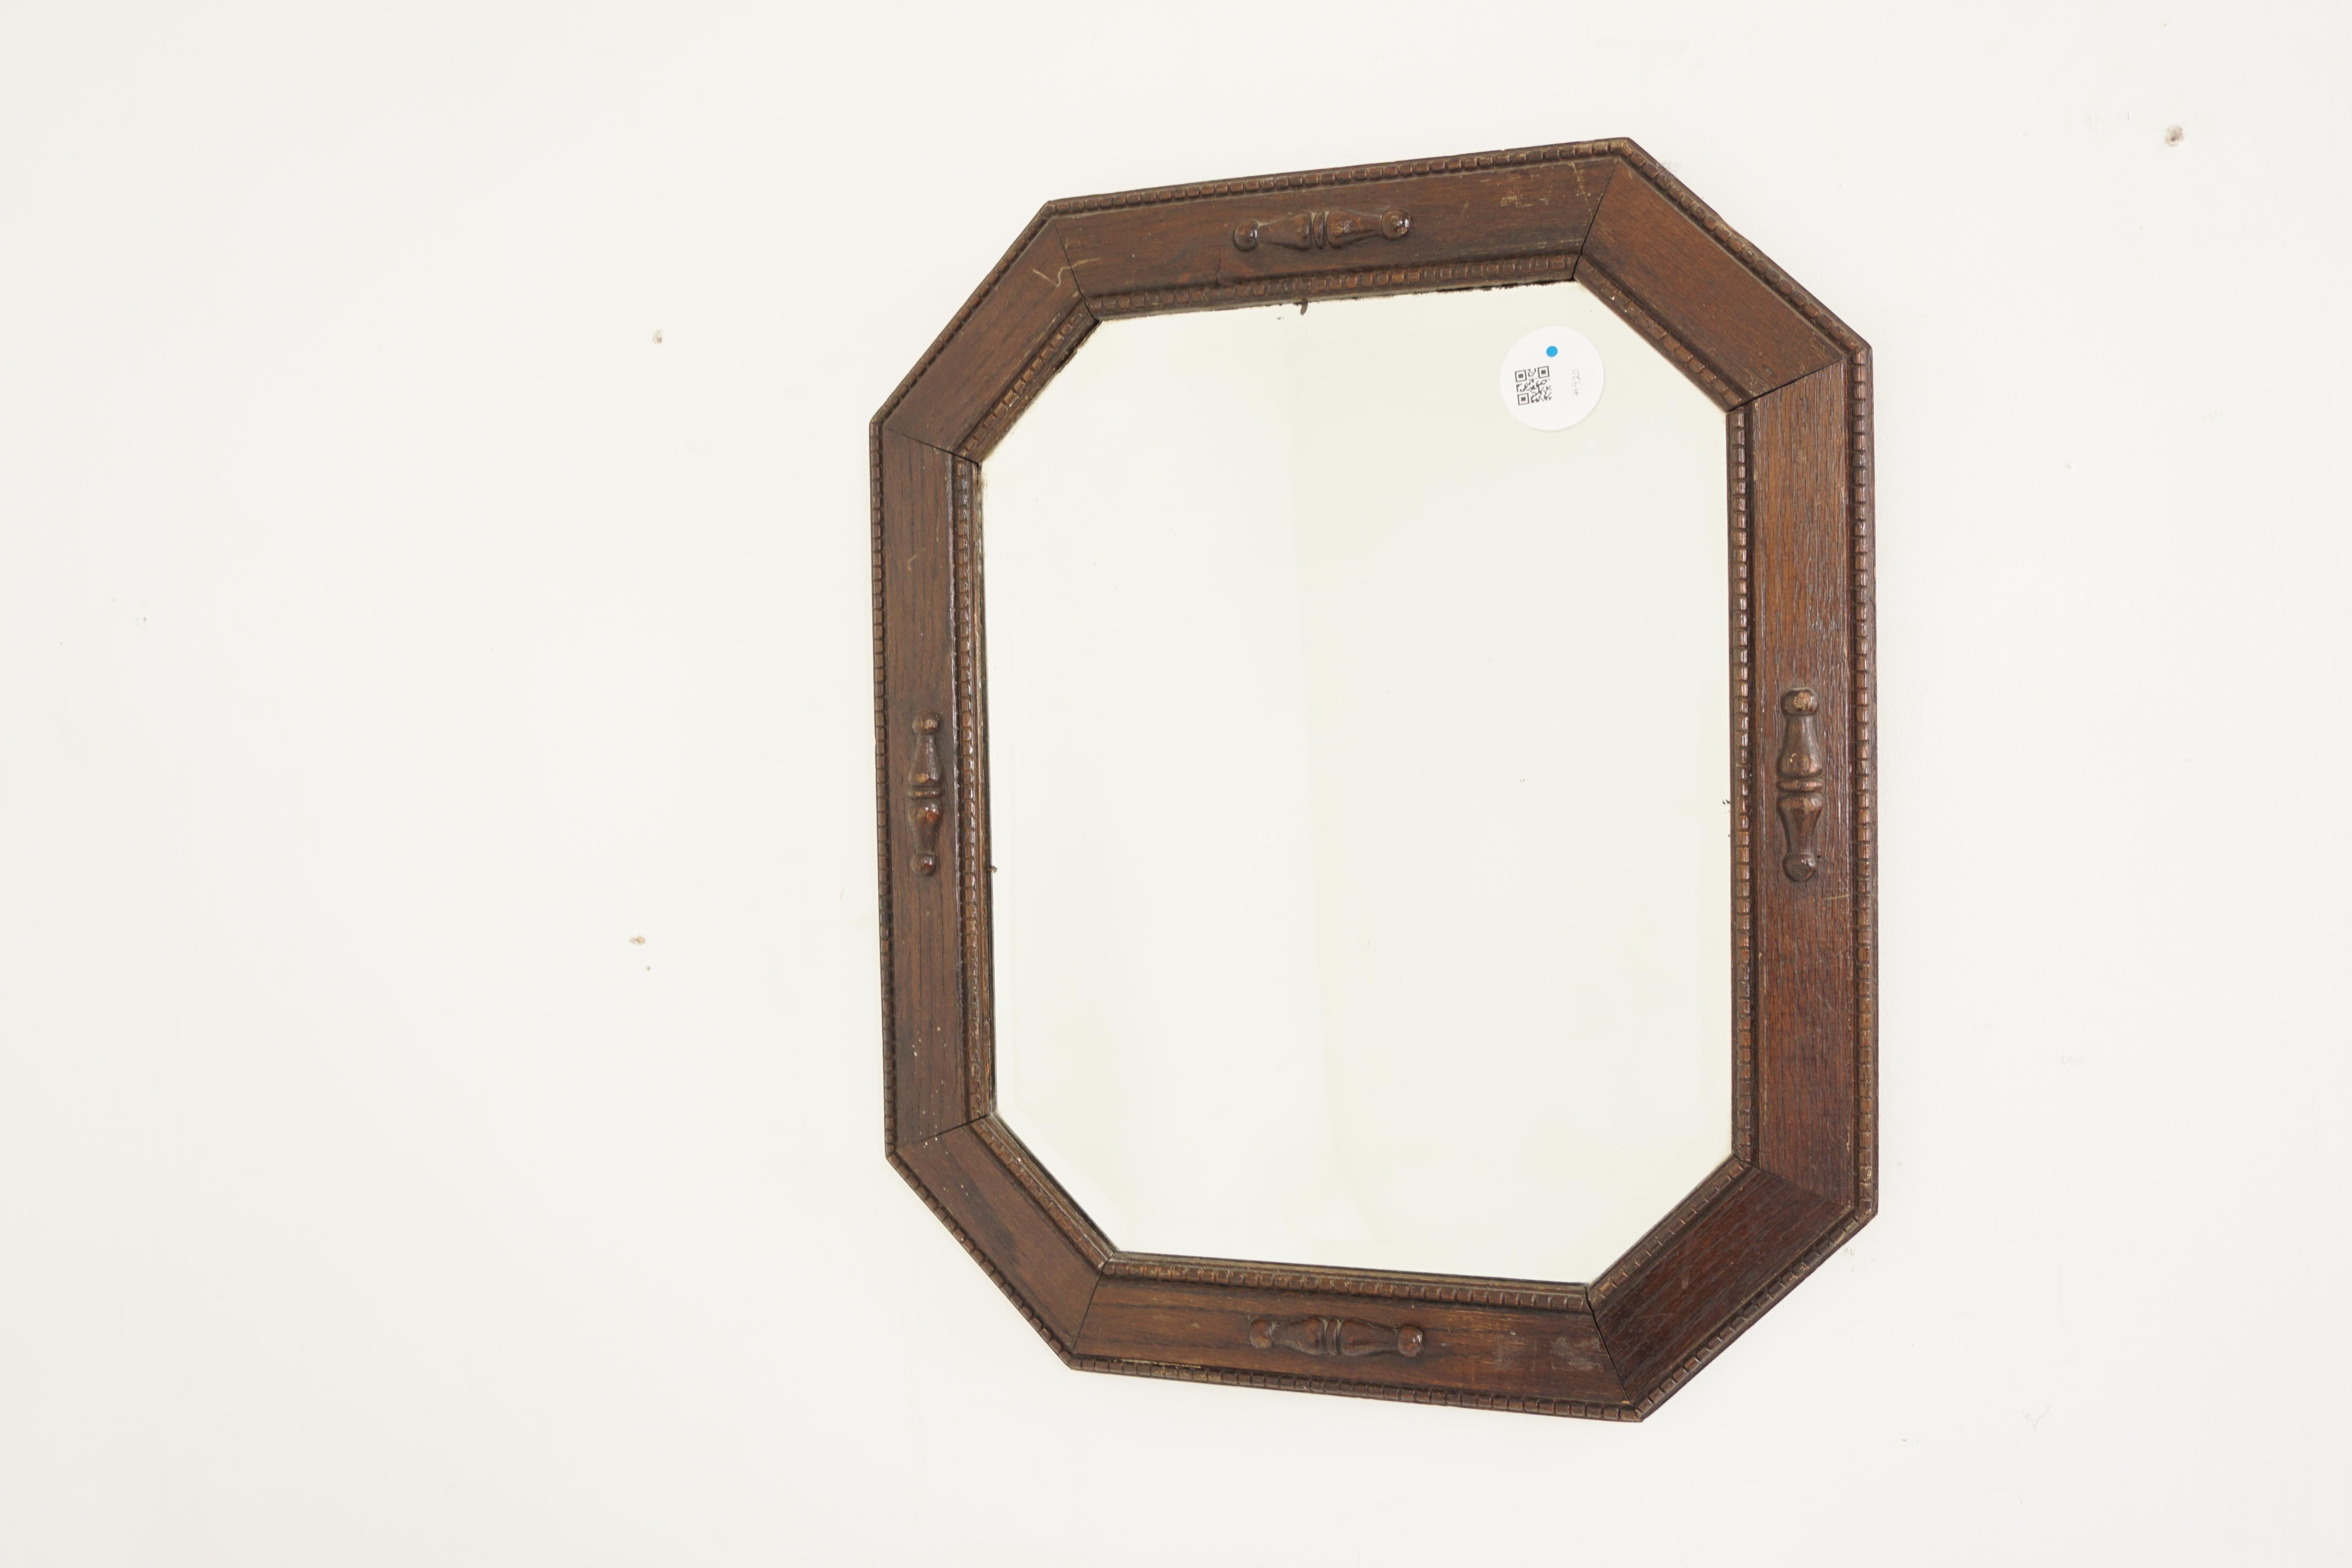 Vintage Oak, framed wall mirror, Scotland 1920, H920

Scotland 1920
Solid oak
Original Finish
Solid oak octagonal frame with oak mouldings
Bevelled mirror
General wear and marks to the mirror and frame commensurate with age
Mirror with some